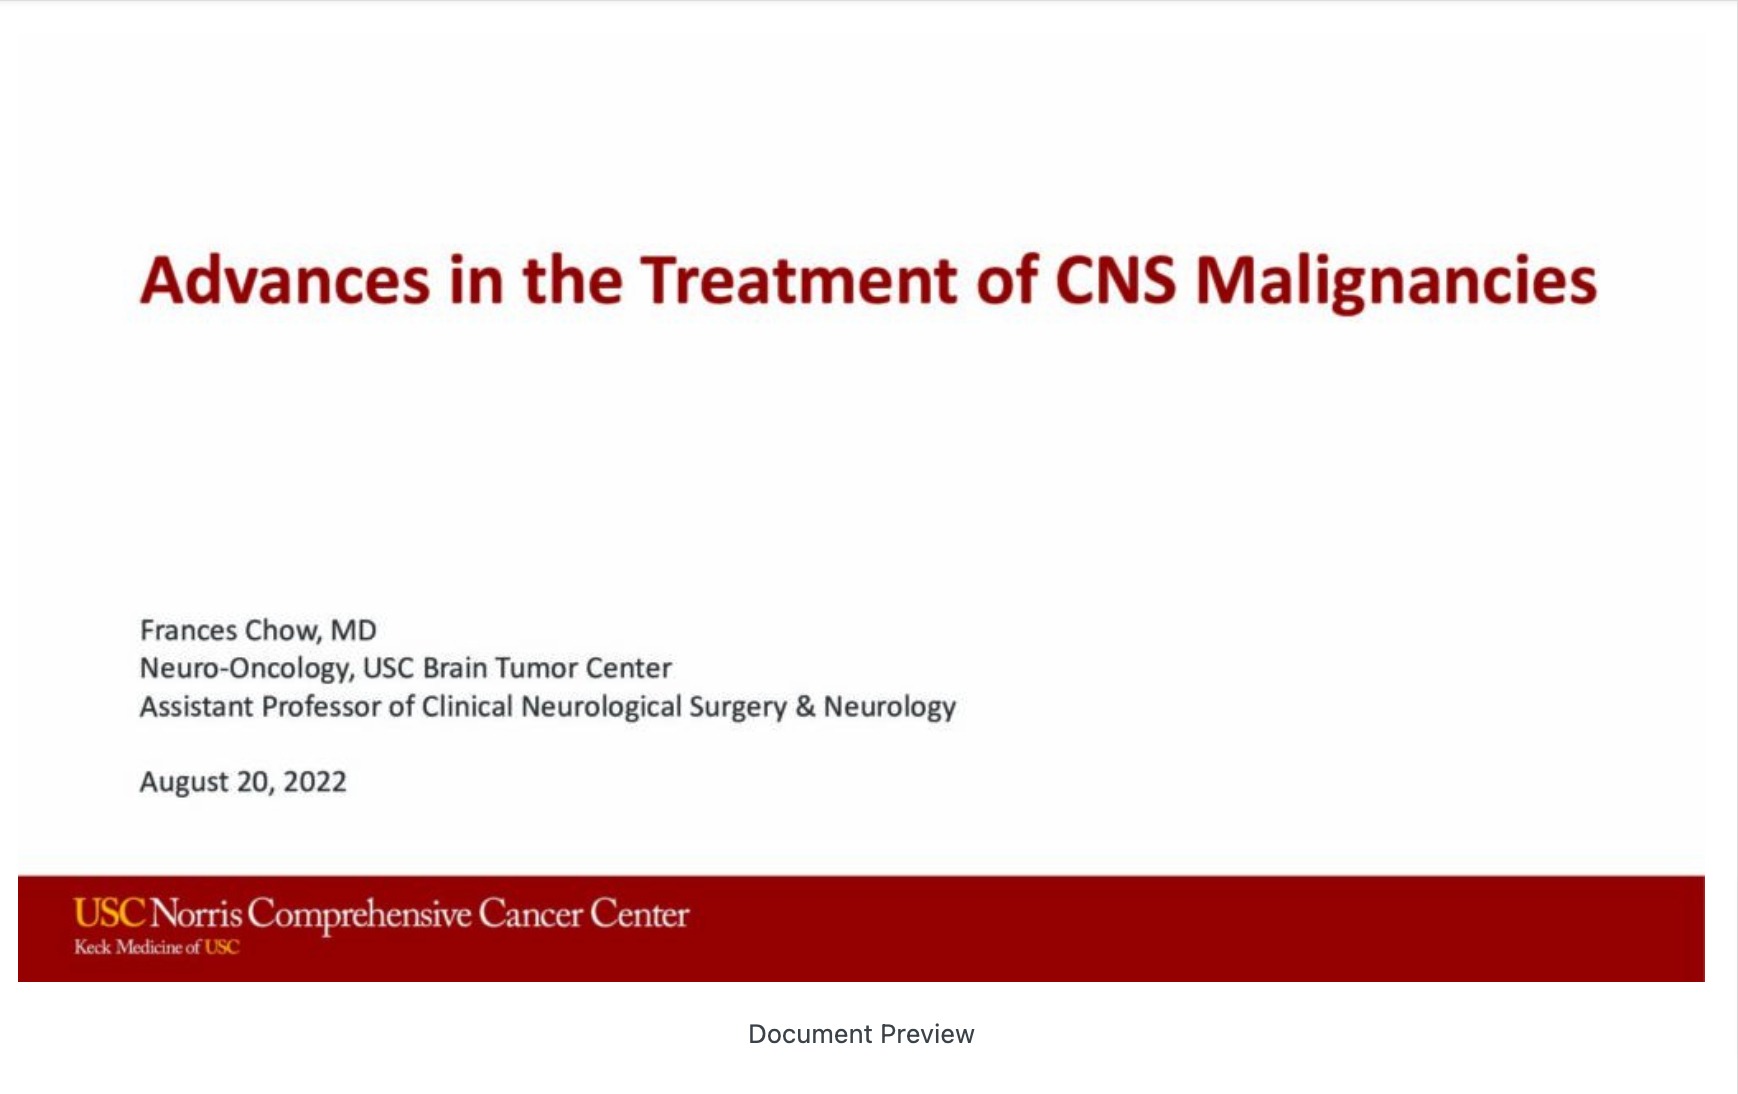 Advances in the Treatment of CNS Malignancies